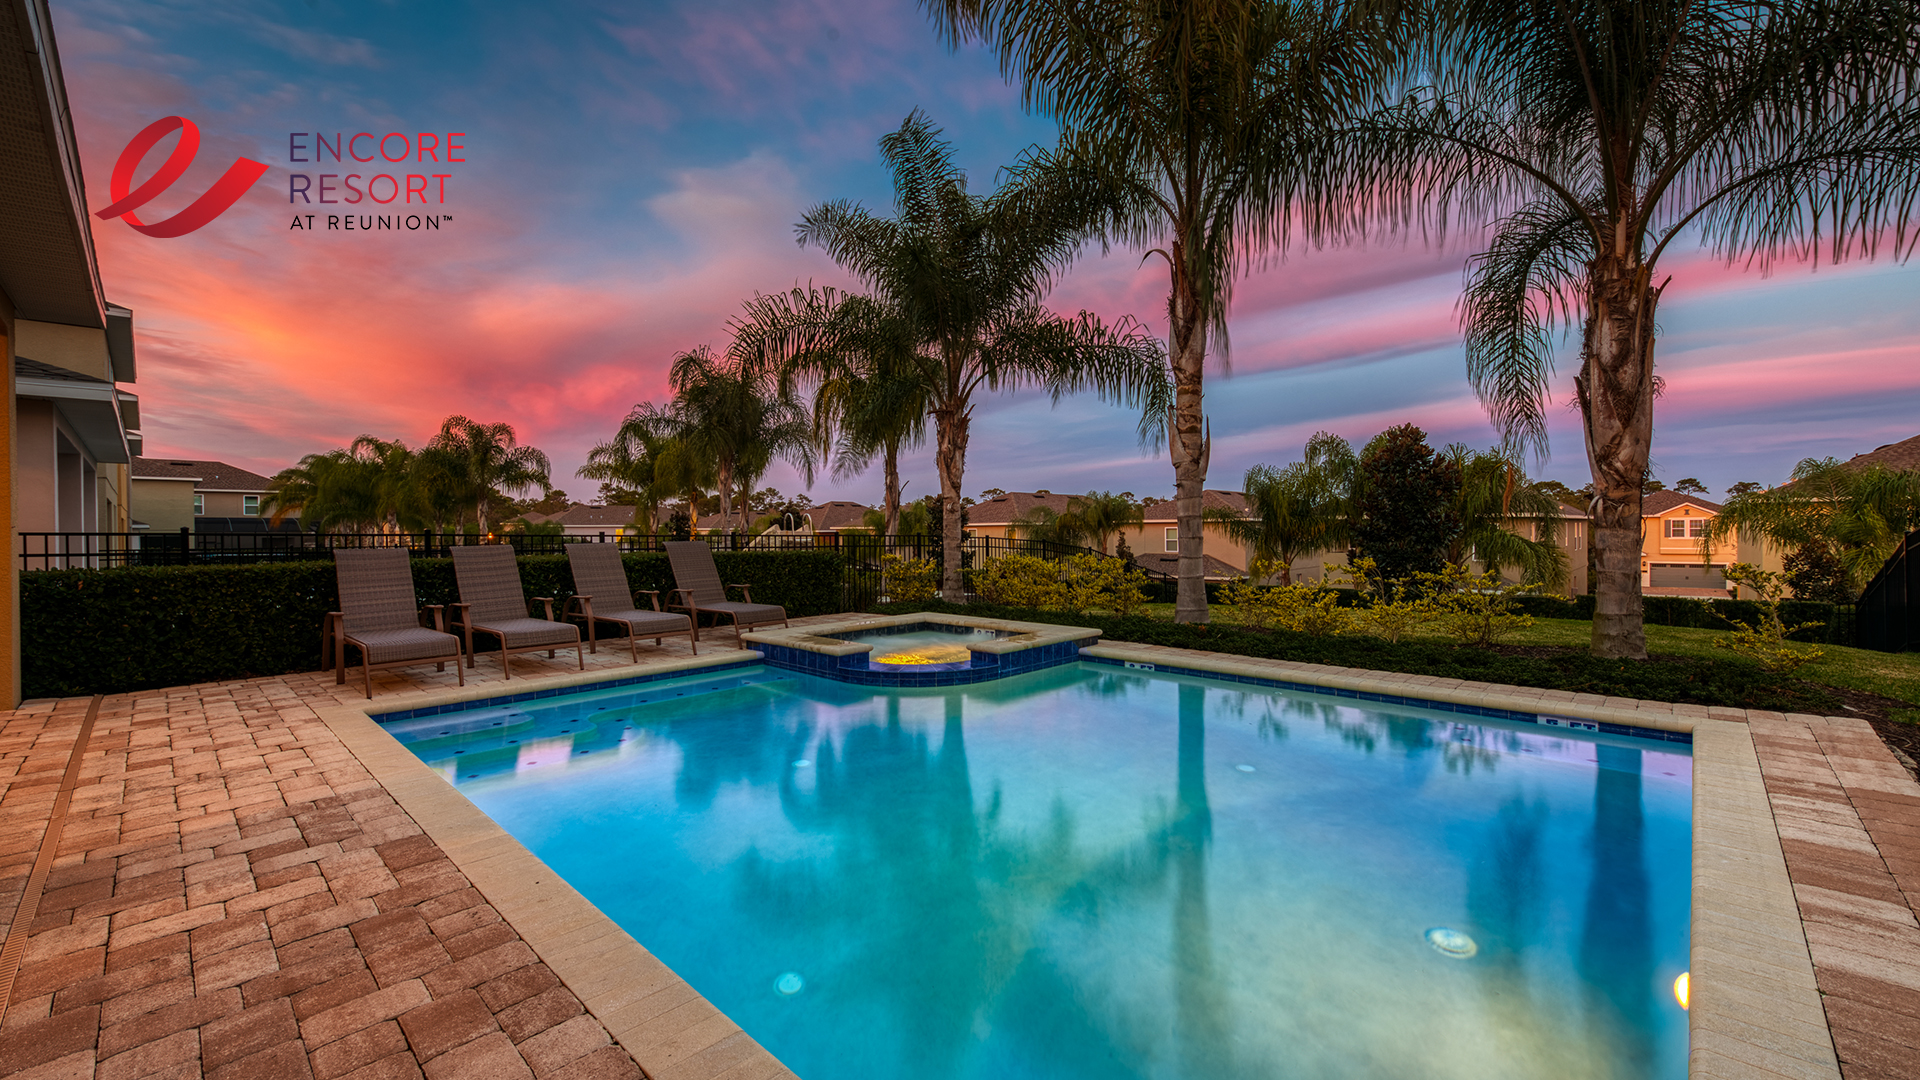 Desktop wallpaper featuring an Encore Resort vacation home private pool at twilight.